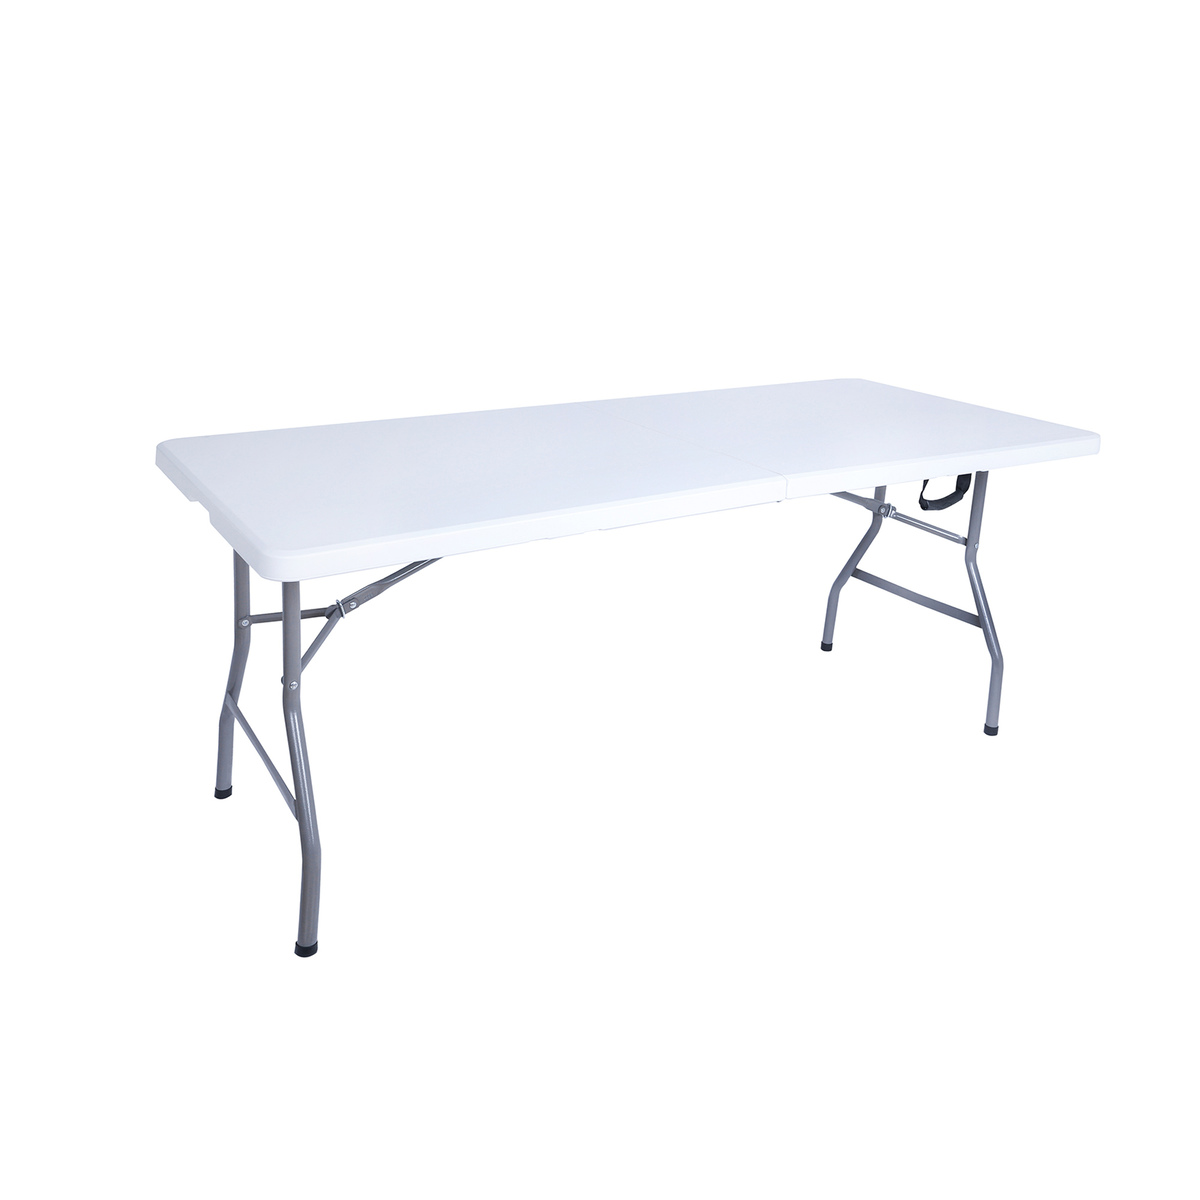 Oryx Foldable Table 6Ft. HY-Z180A